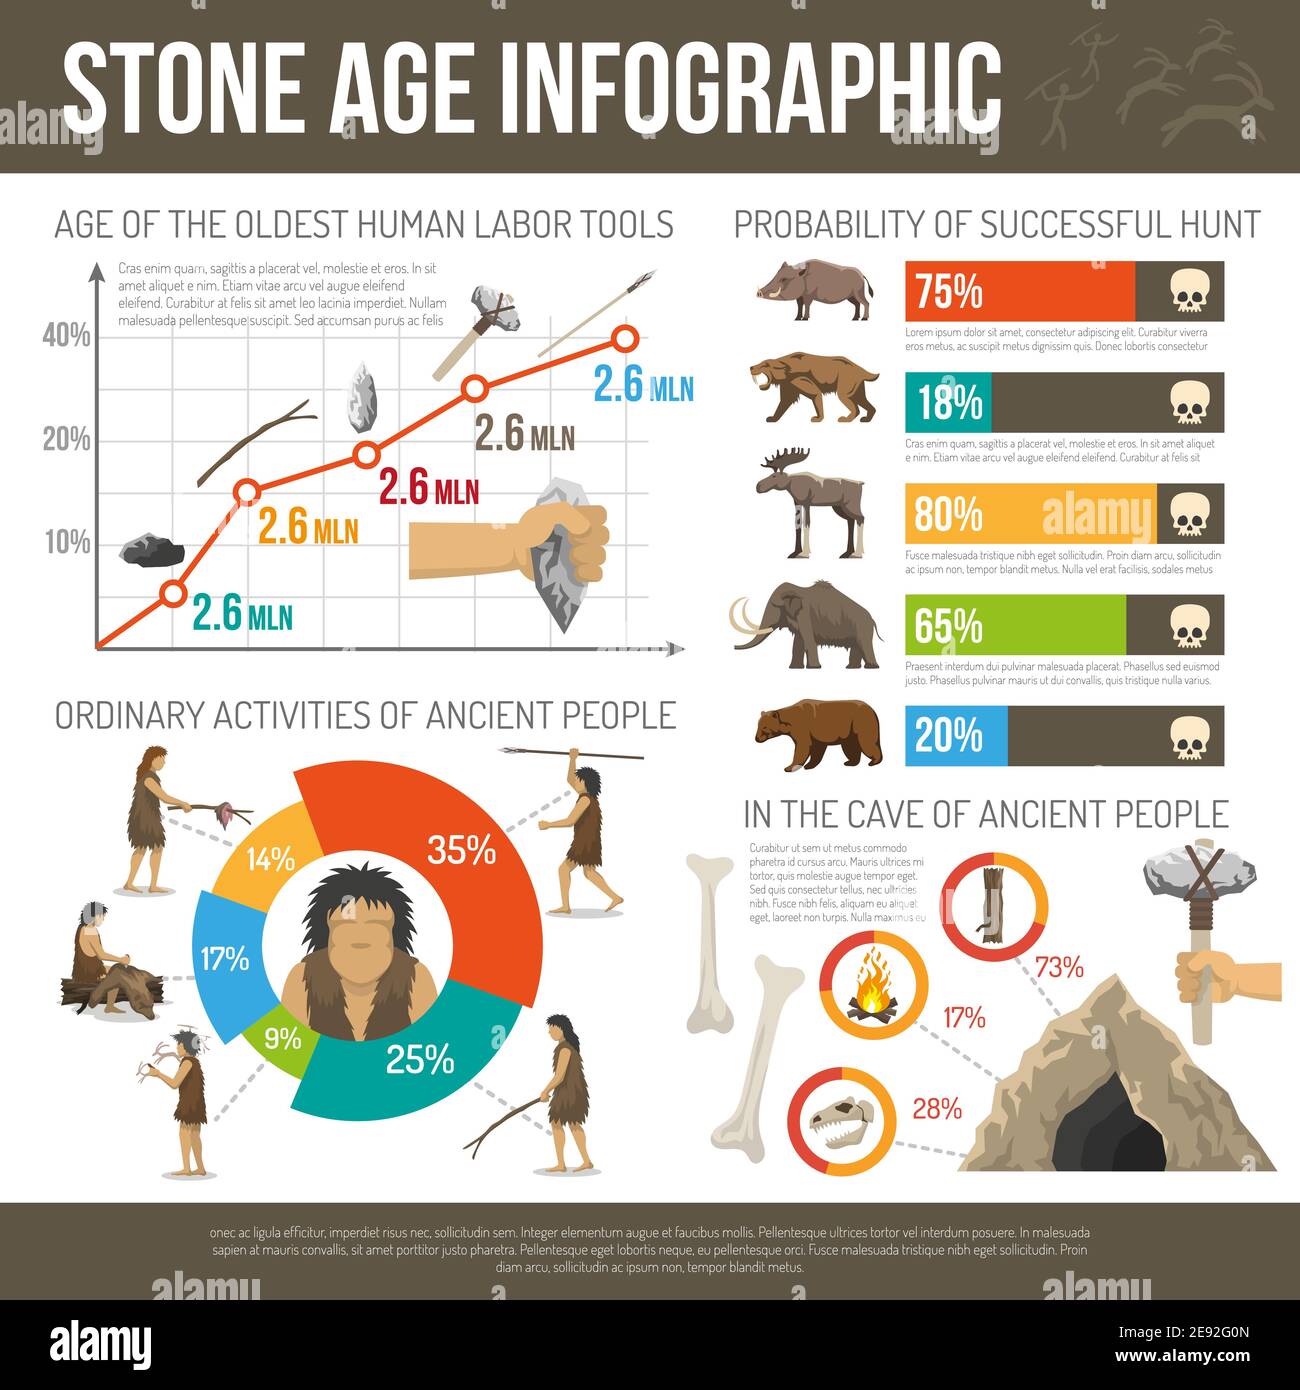 Infographic ancient people life activities tools cave hunt in